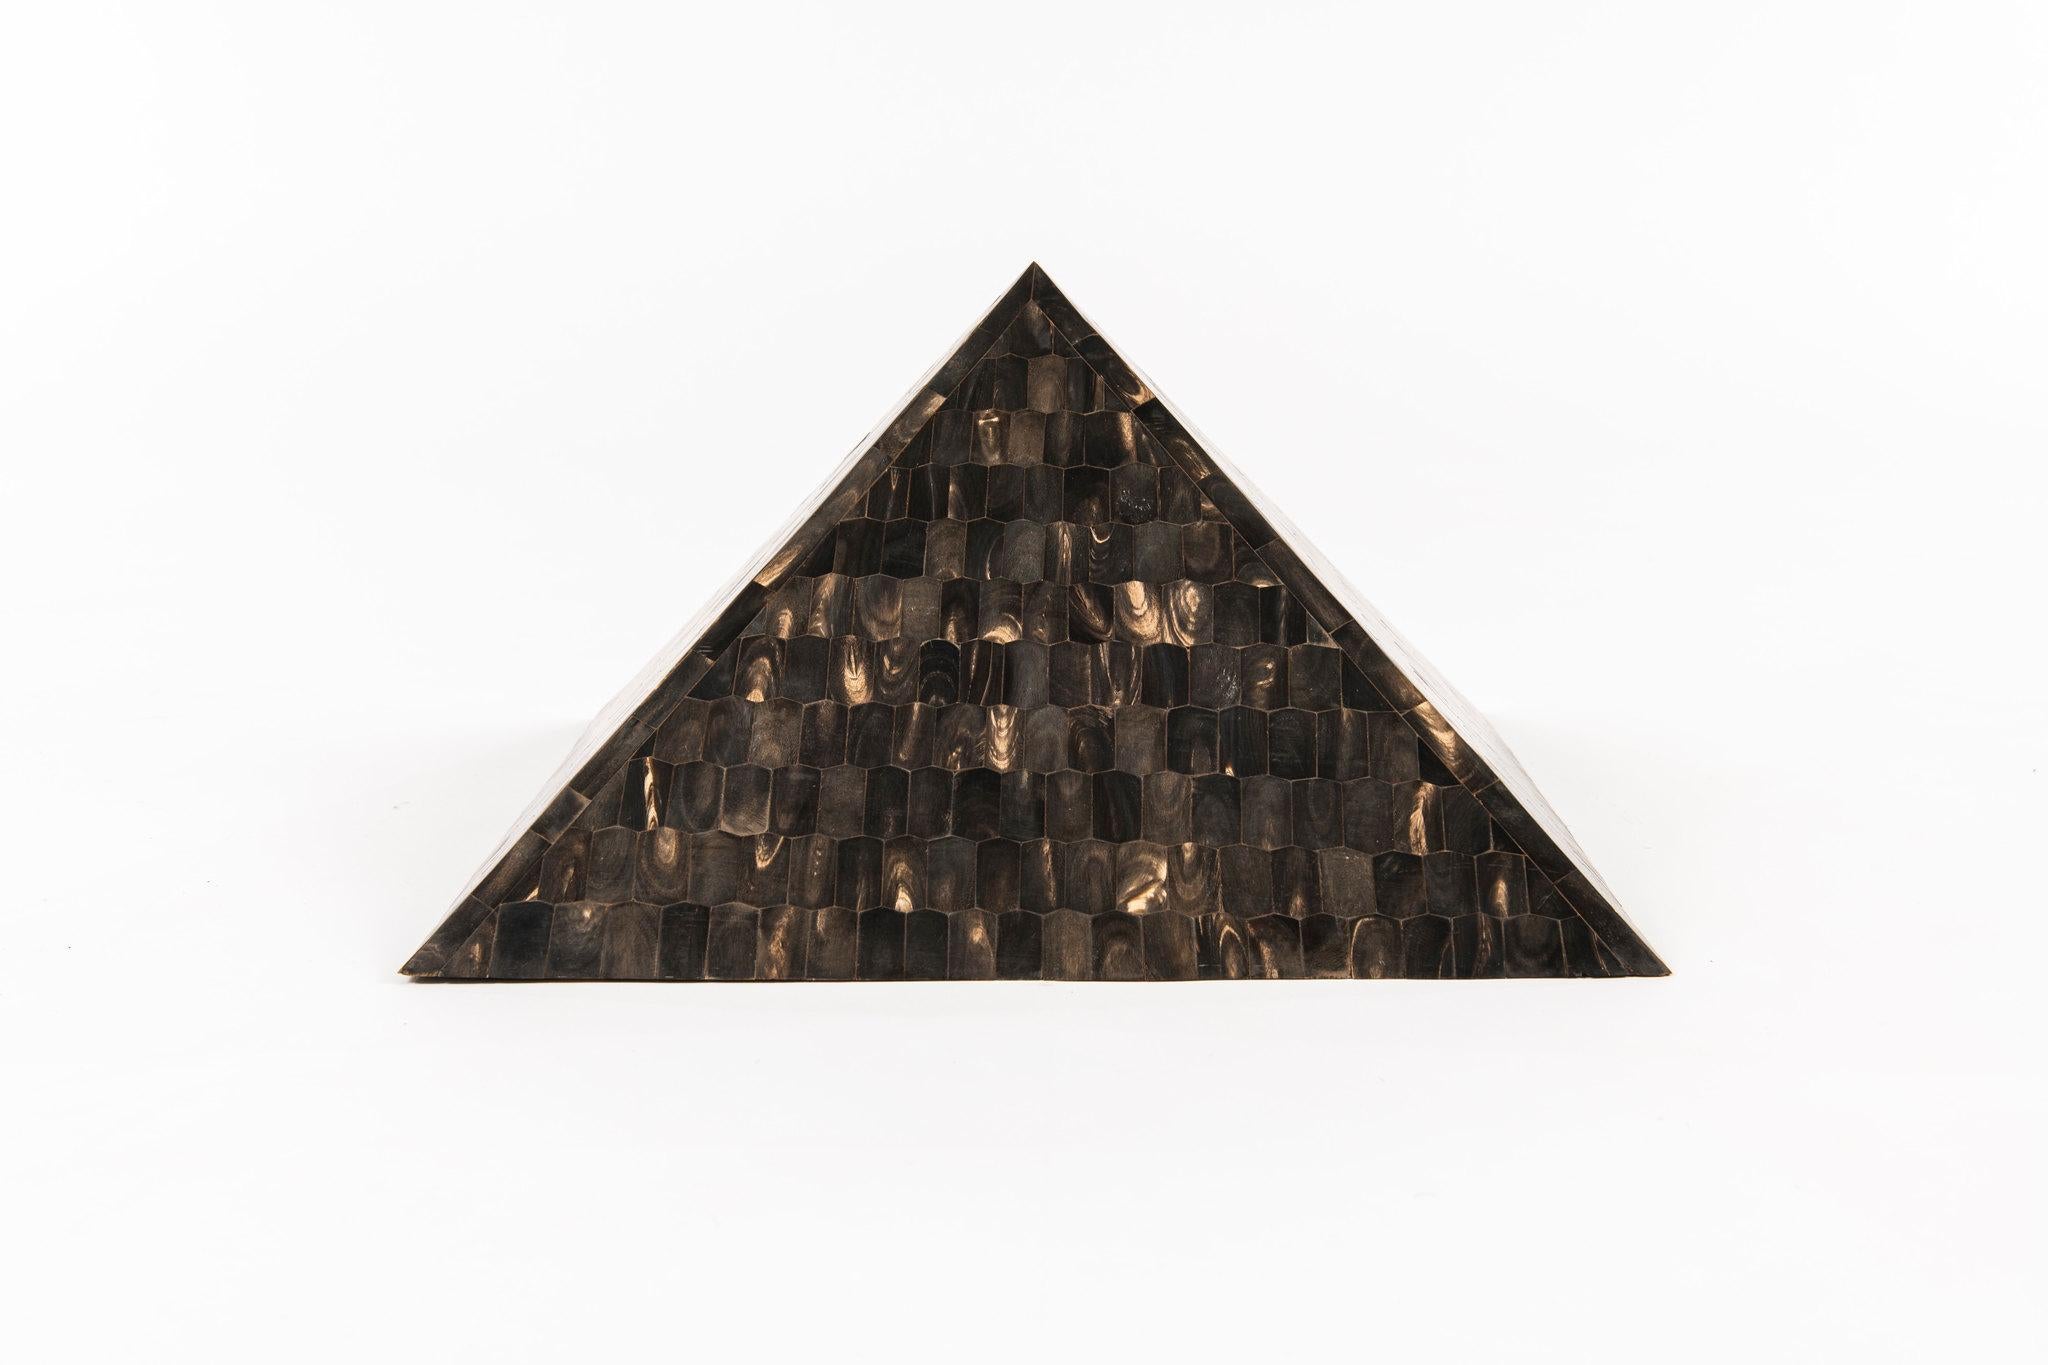 A vintage tessellated dark horn pyramid. This piece exudes extraordinary craftsmanship shown in every detail of each modified hexagon placed. Coloring is Jacobean, espresso and almost black with bit of mottled faint beige. Great addition to any